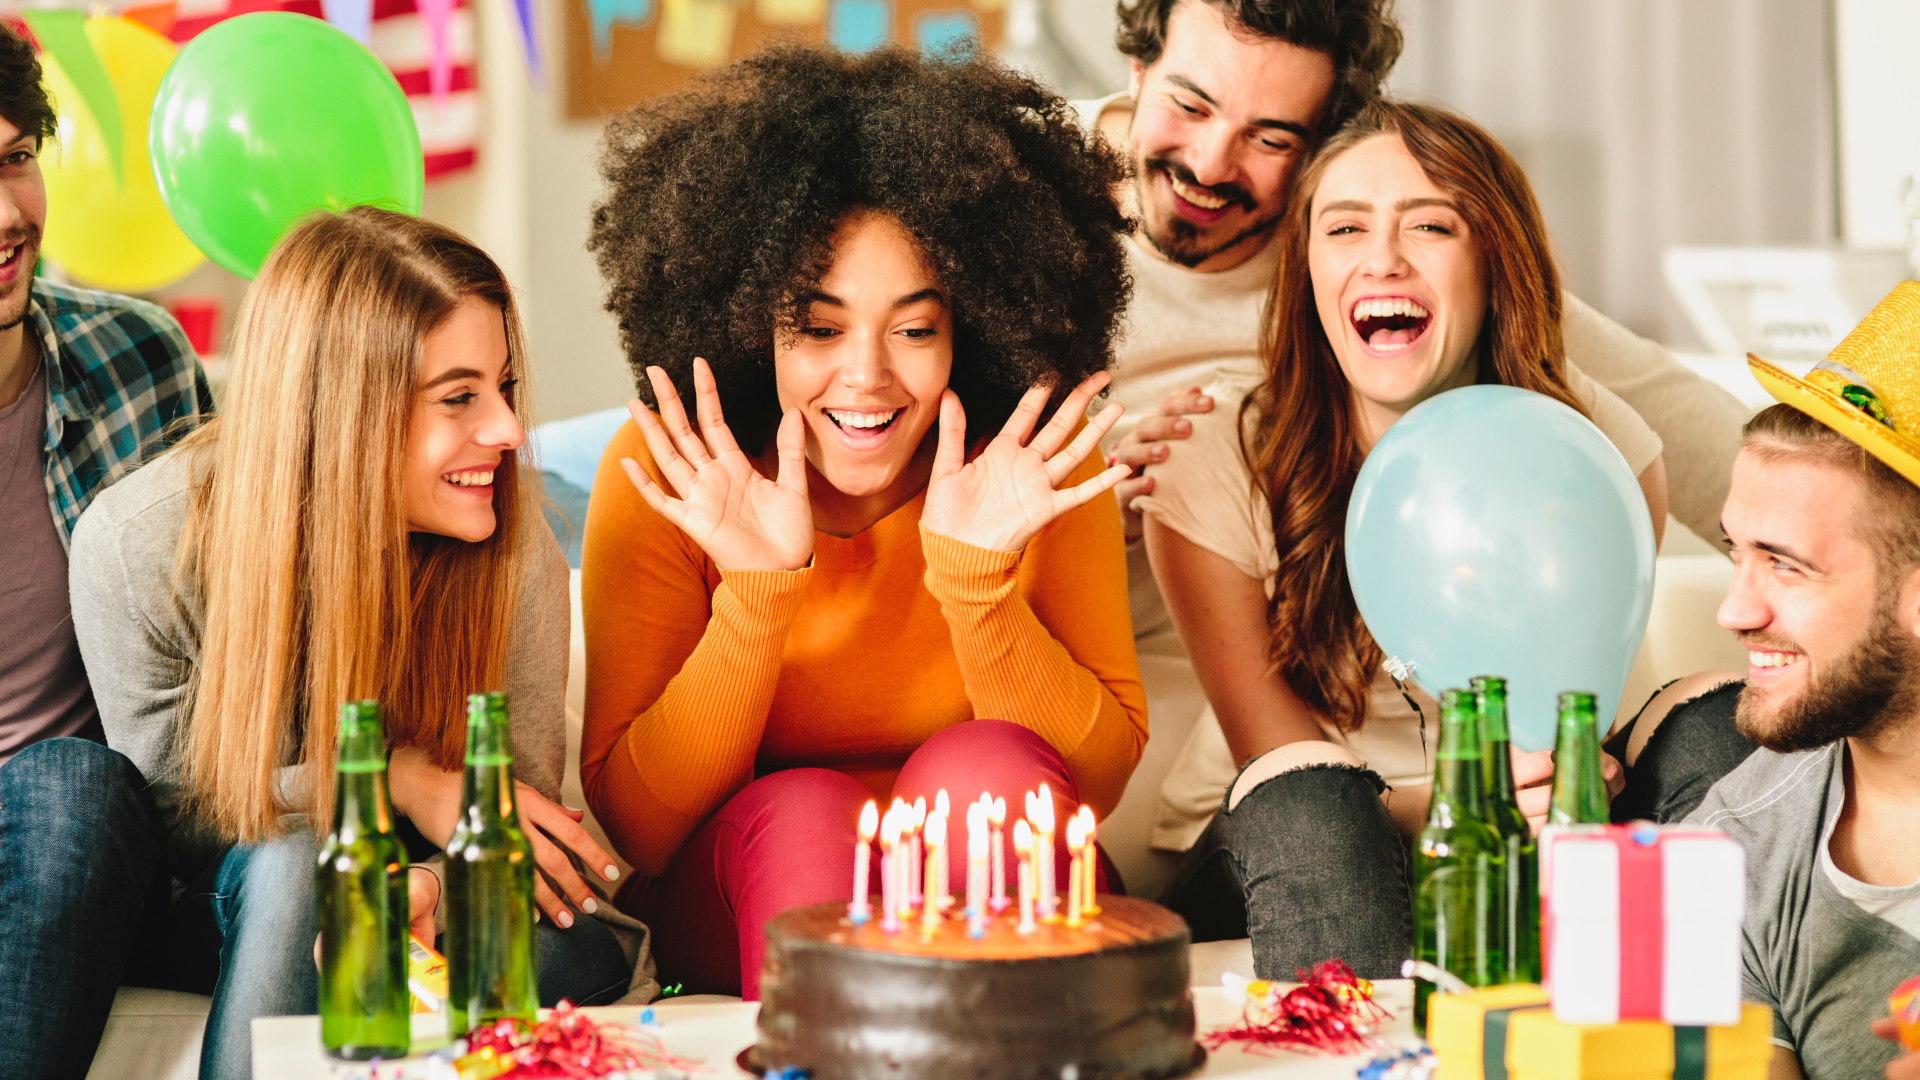 Group of friends around a lady celebrating her birthday looking at a birthday cake